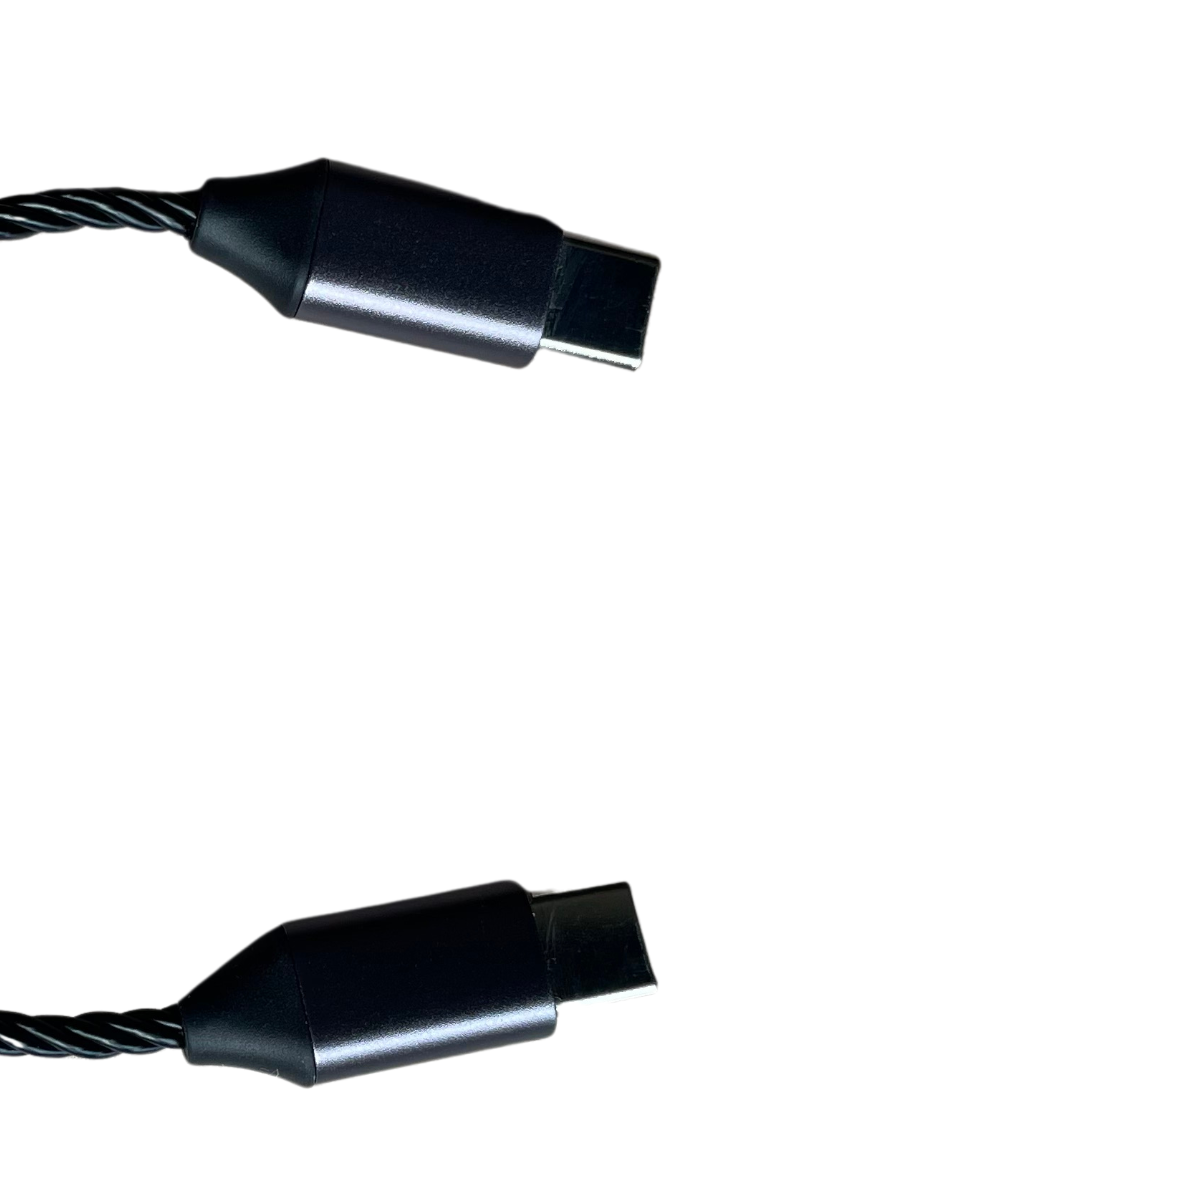 EarAudio Type C to Type C Interconnect Cable